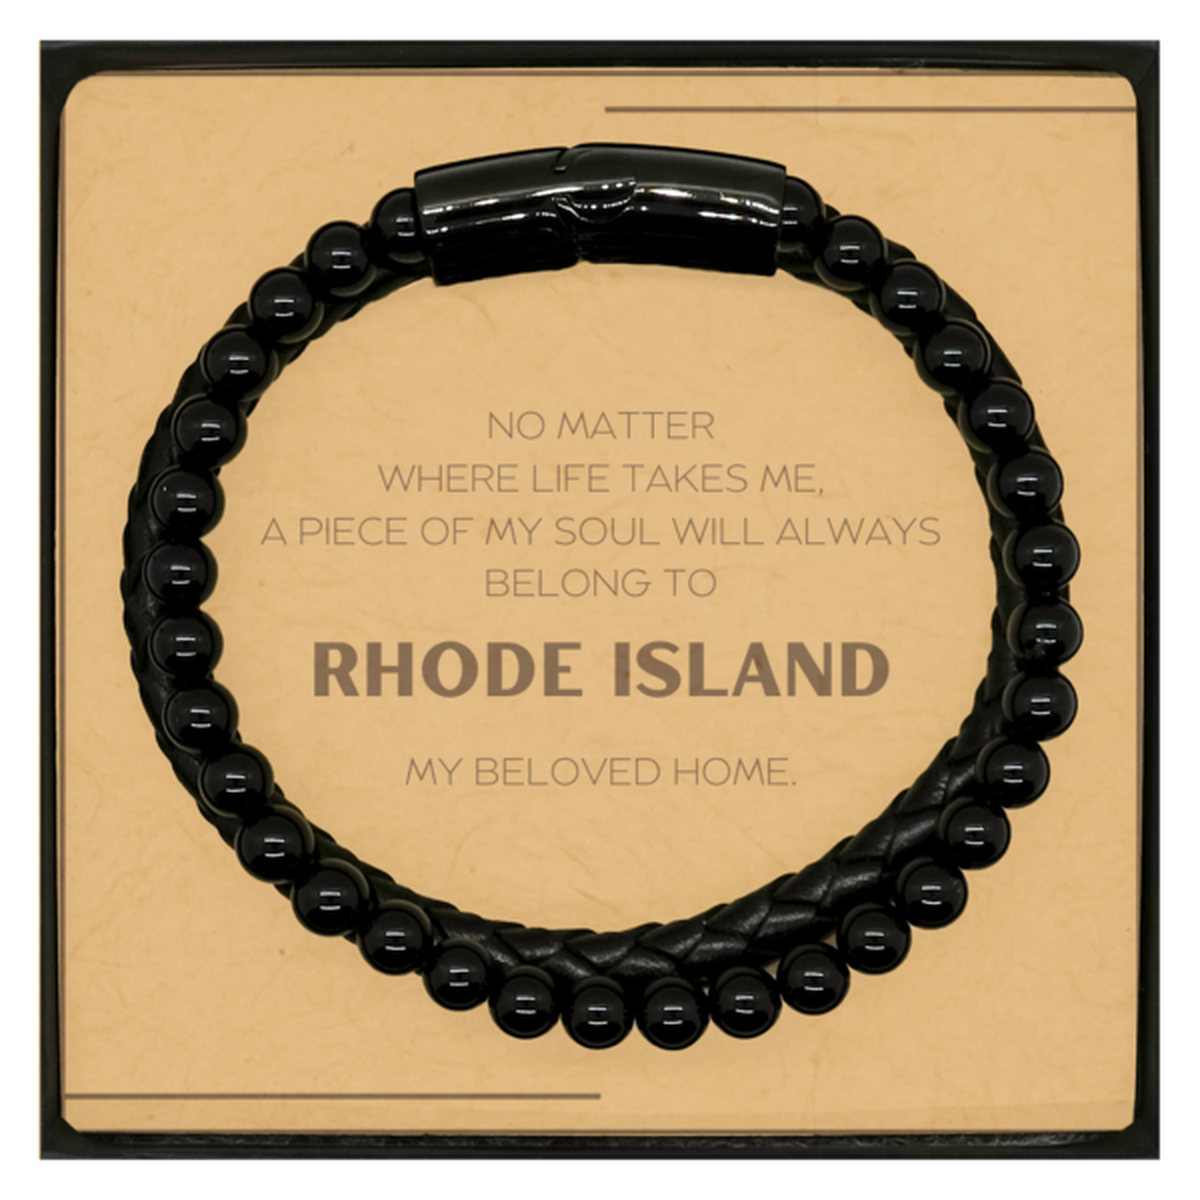 Love Rhode Island State Gifts, My soul will always belong to Rhode Island, Proud Stone Leather Bracelets, Birthday Christmas Unique Gifts For Rhode Island Men, Women, Friends